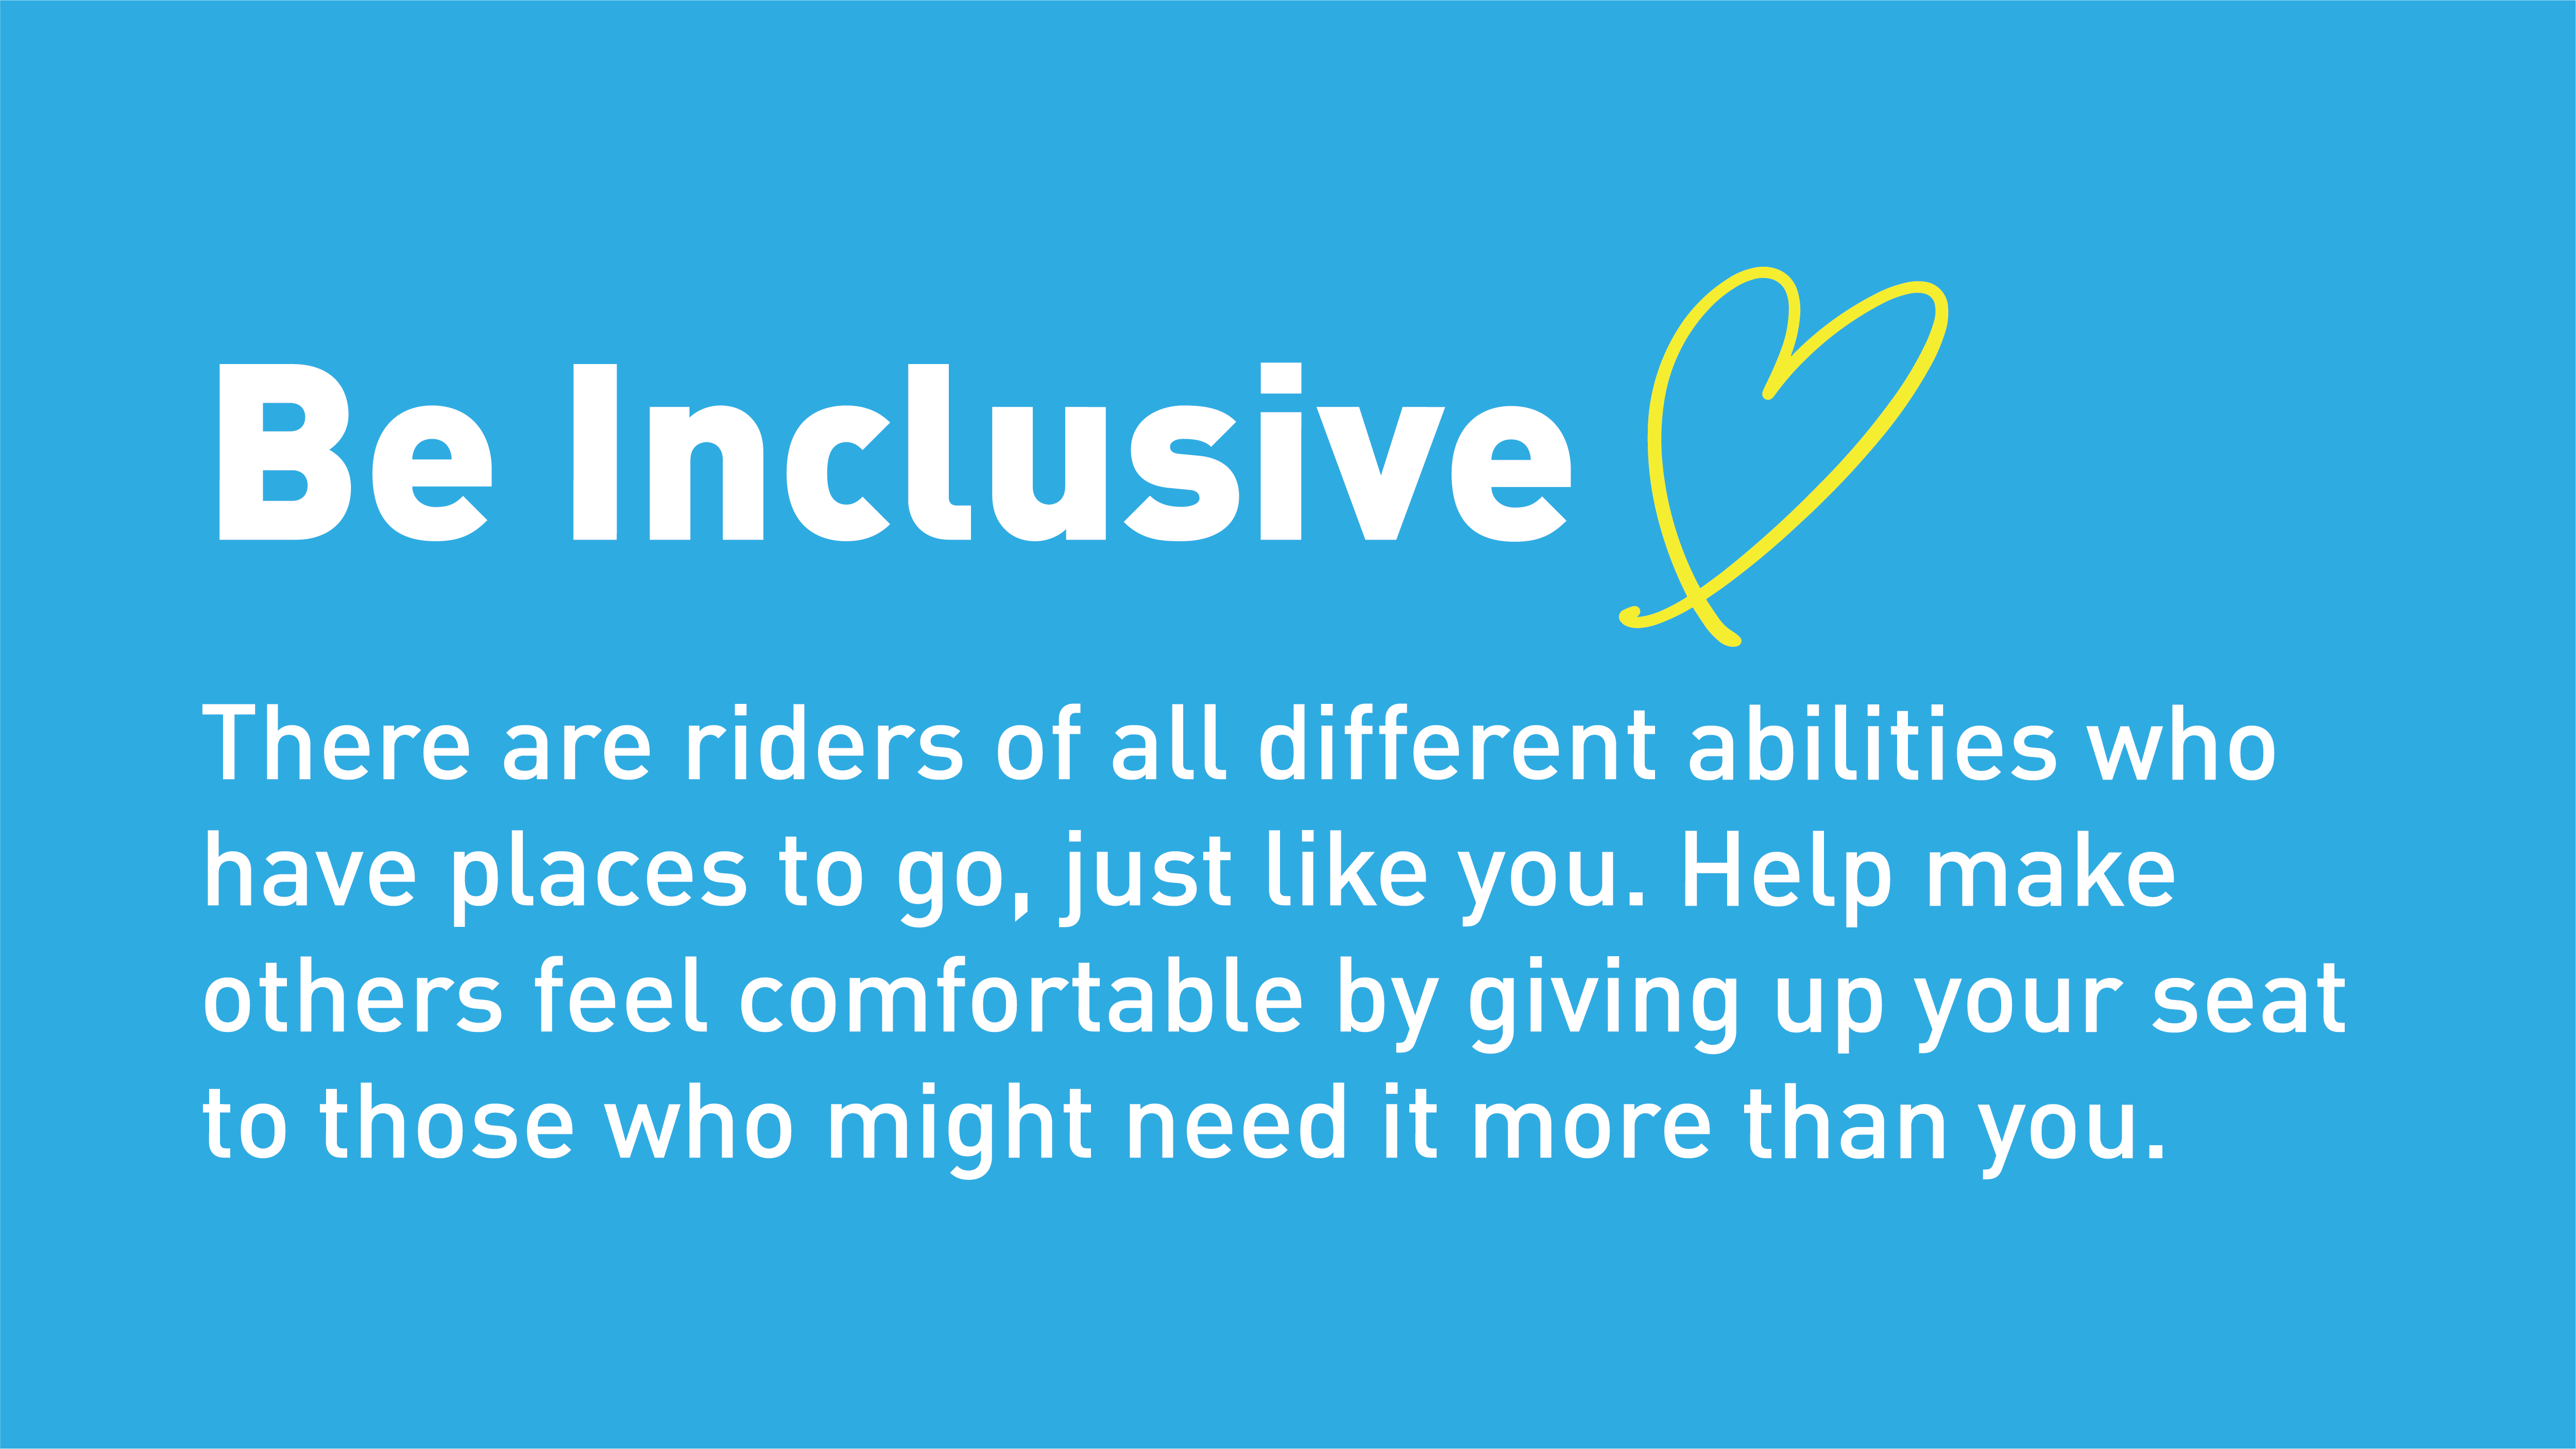 Be Inclusive. Give your seat to others who might need it more than you